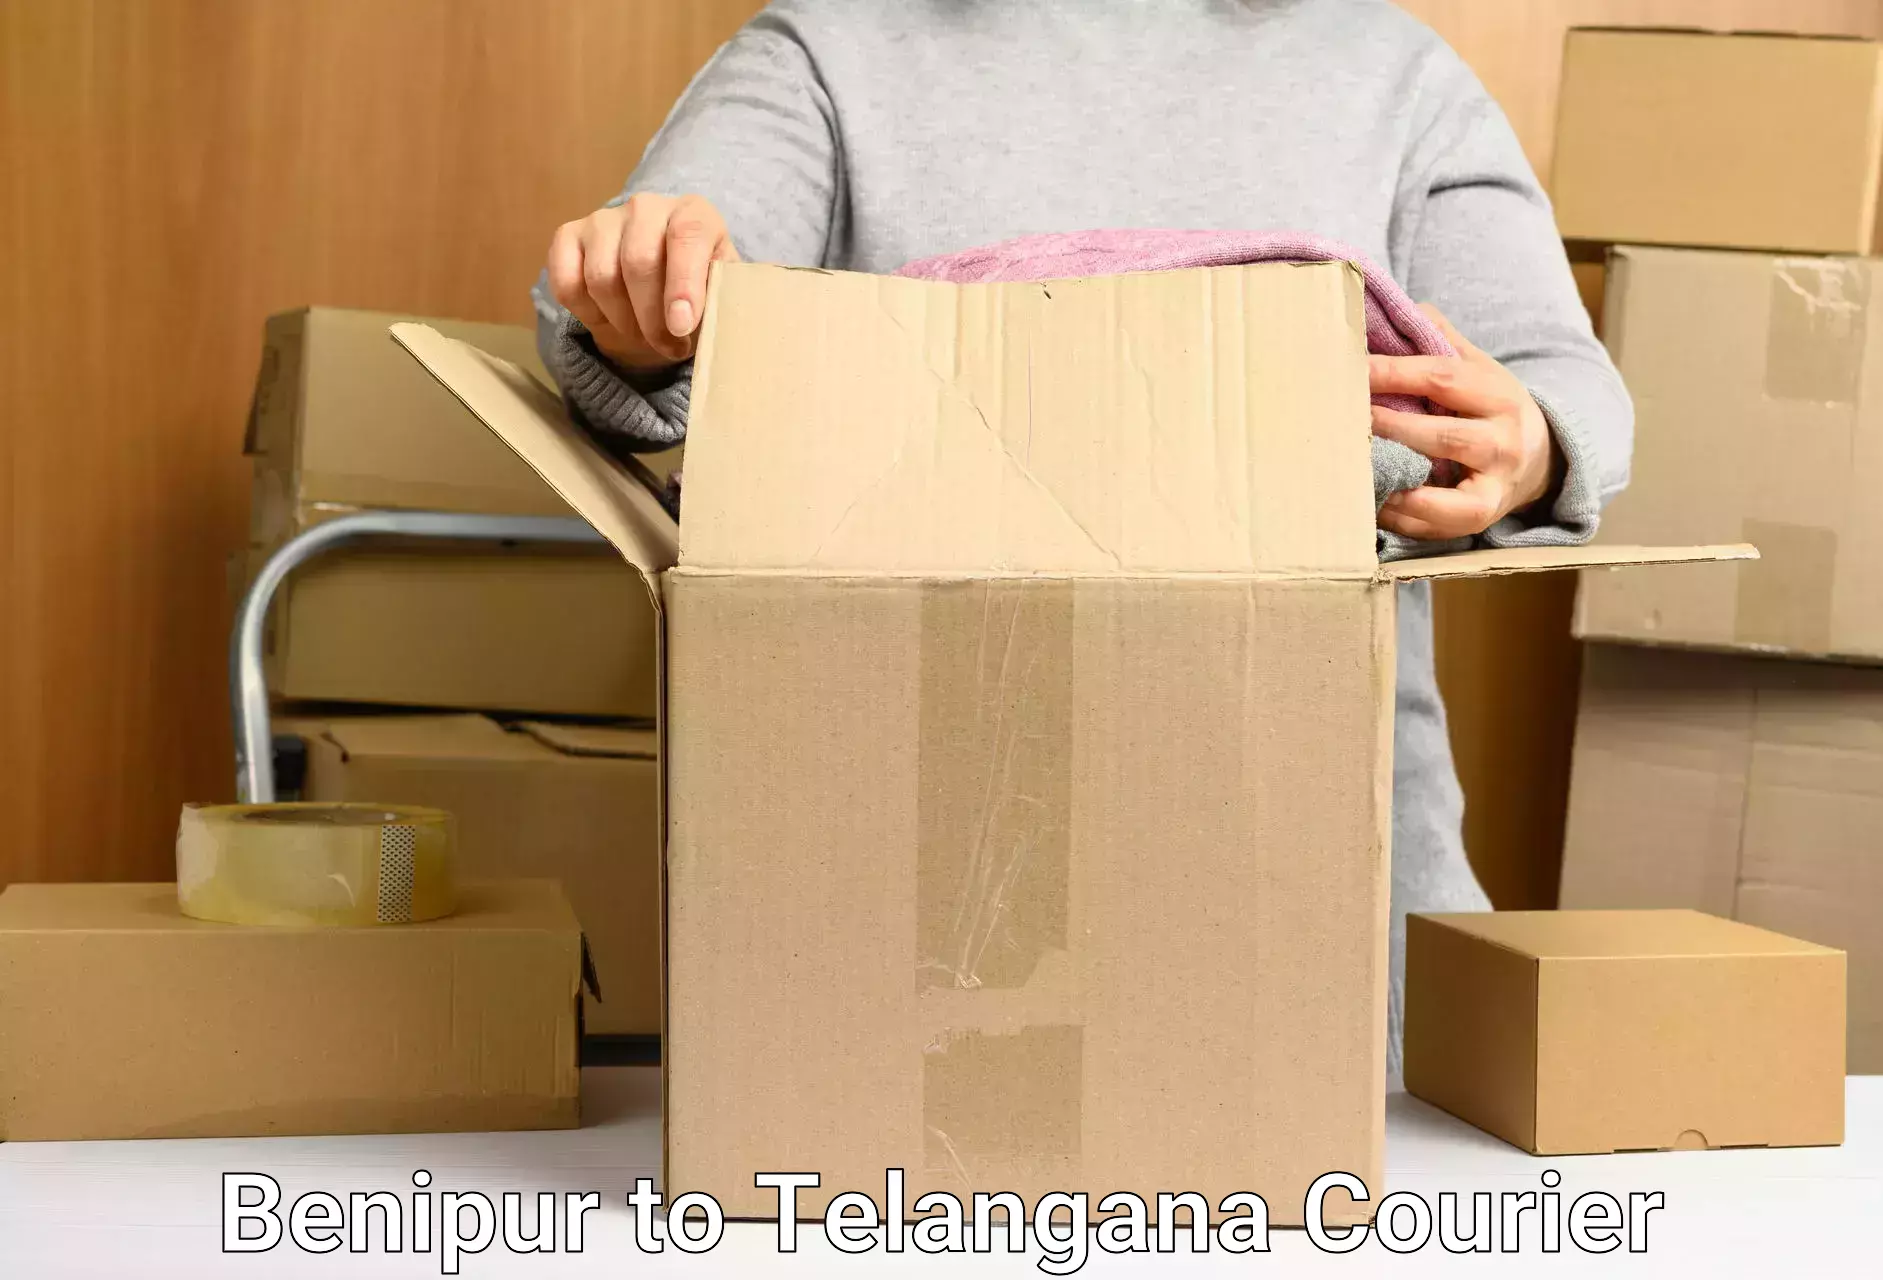 Reliable courier services Benipur to Sangareddy